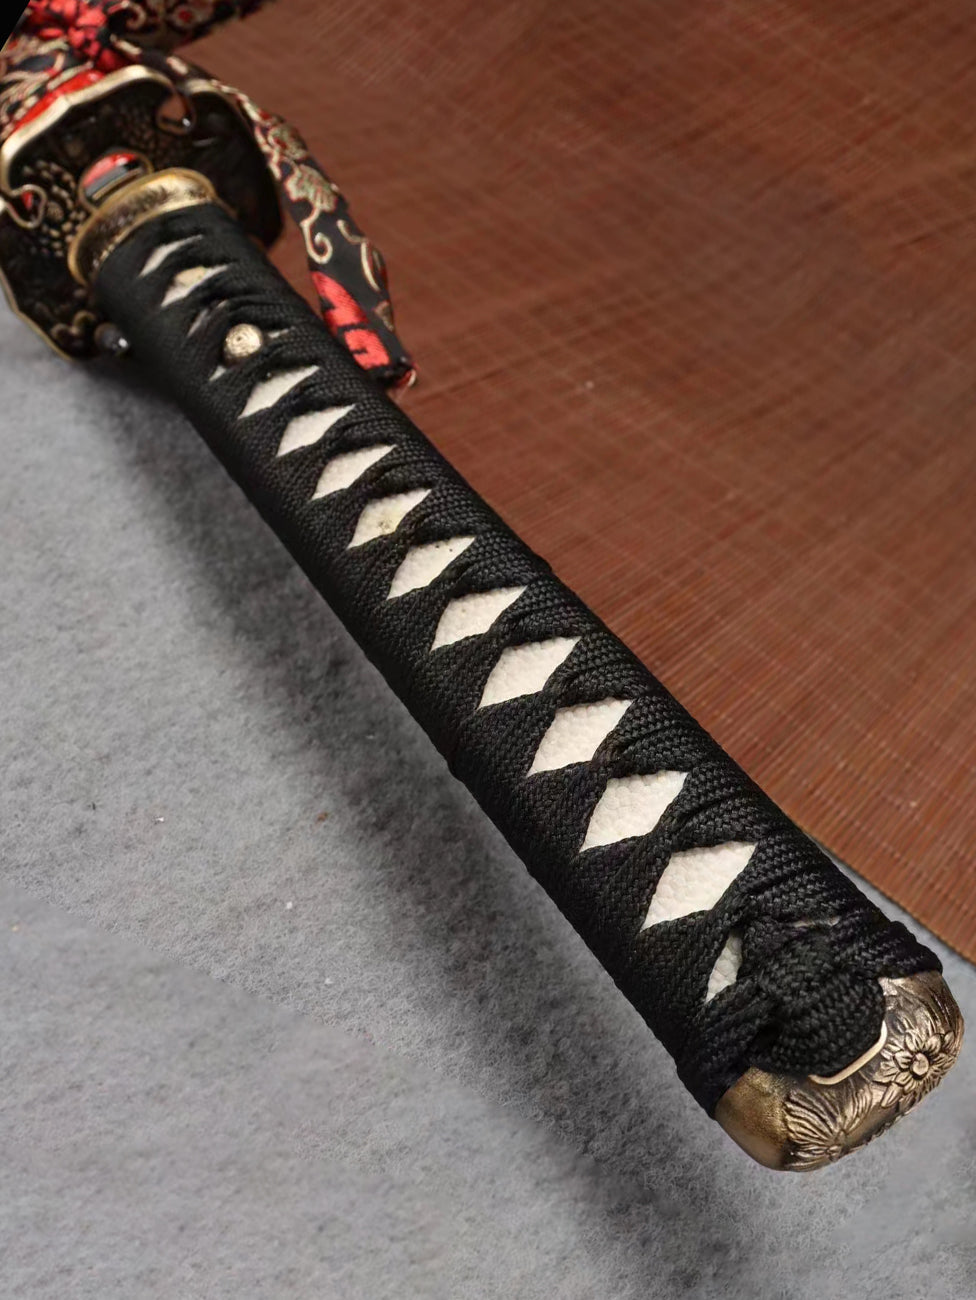 Handcrafted Katana1060 Steel Blade, Ideal Martial Arts and Collectors